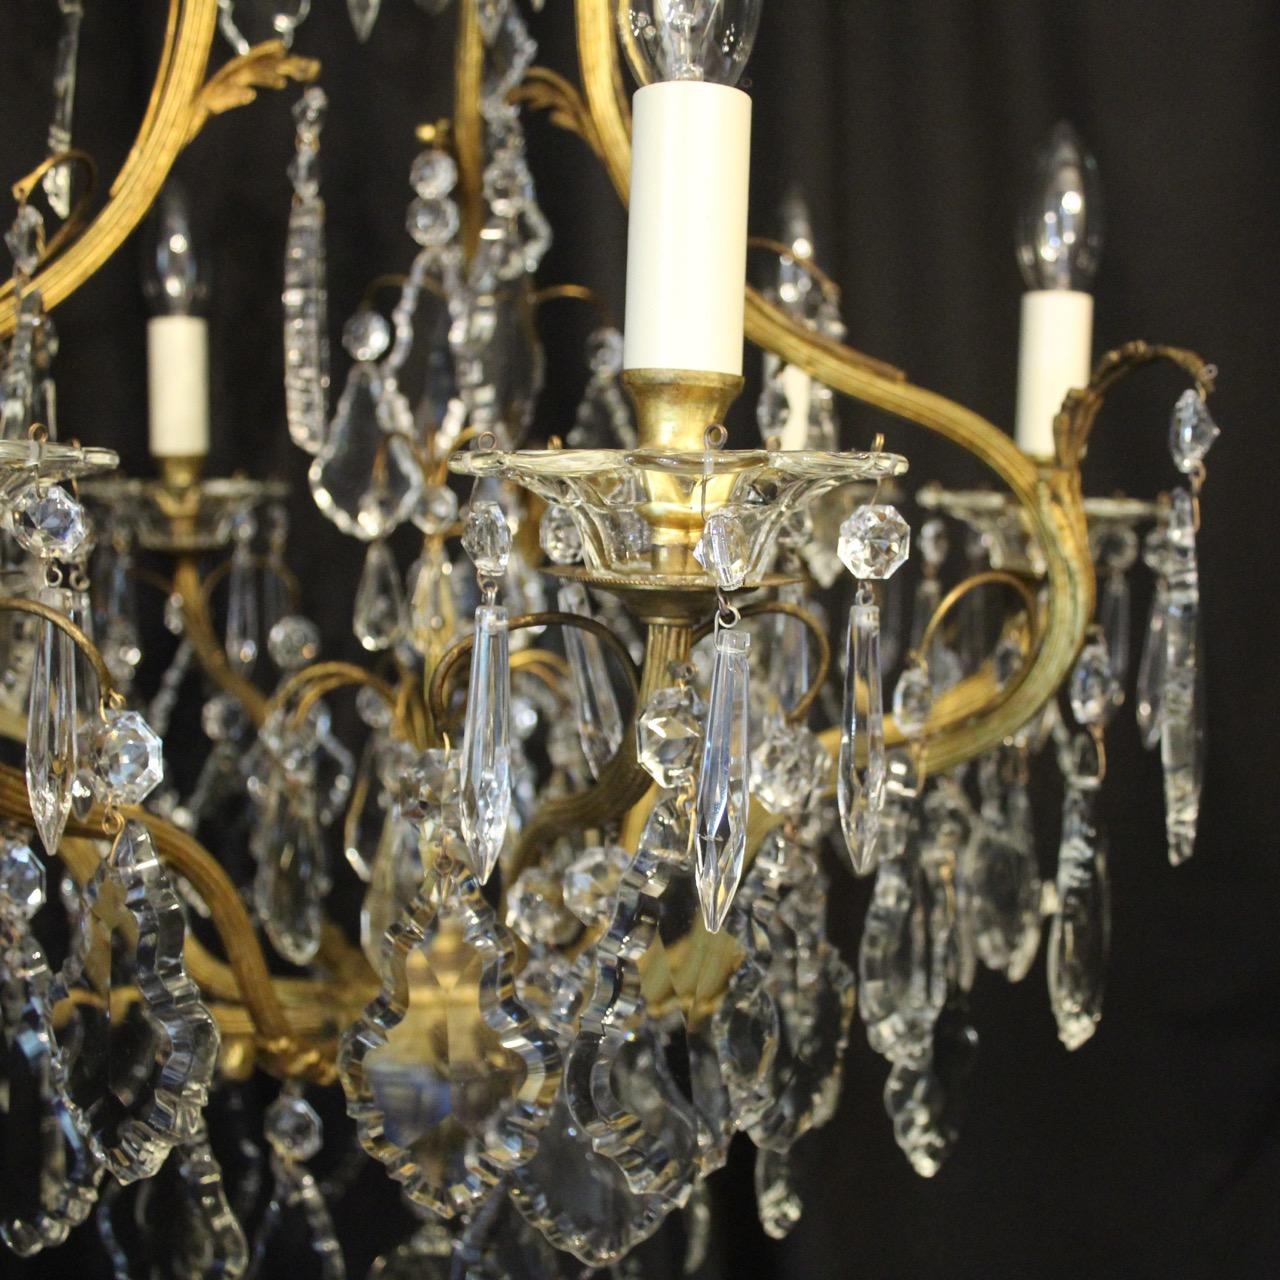 A French gilded brass and crystal seven-light birdcage form antique chandelier, the 6 reeded scrolling arms with glass bobeche drip pans and bulbous candle sconces, issuing from an foliated cage form interior with a single inverted light fitting and